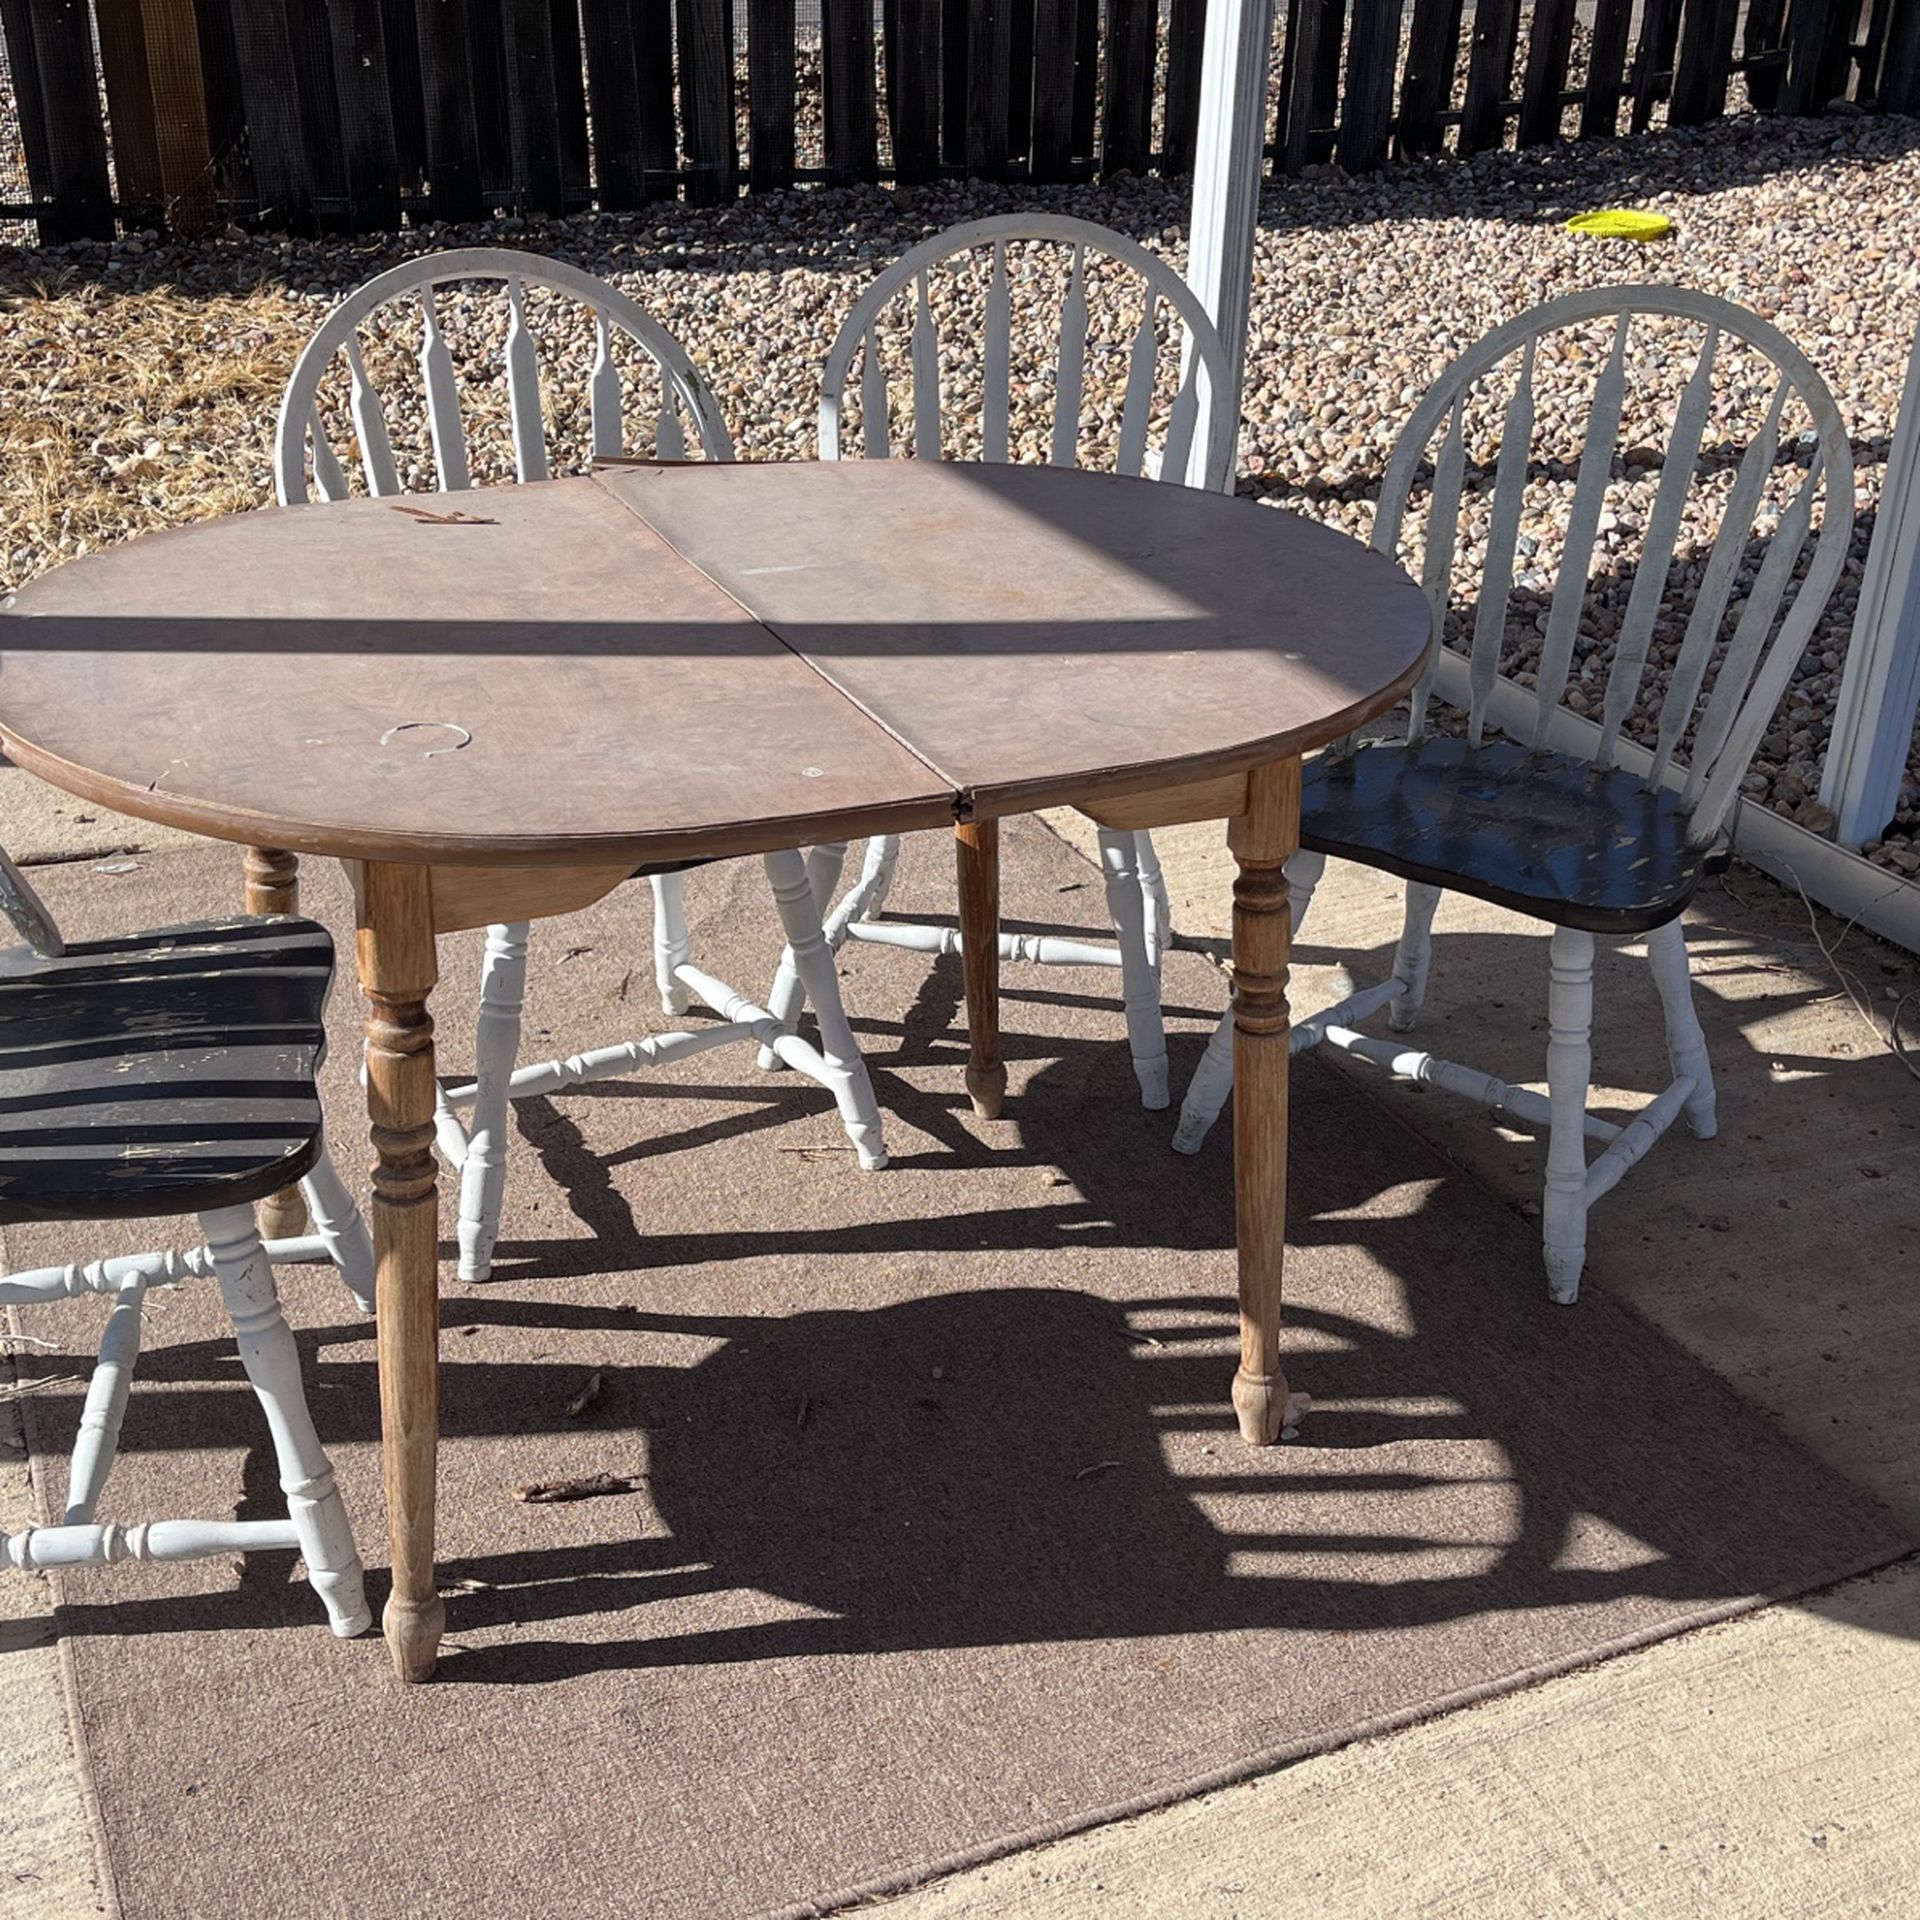 4 Free Wooden Chairs